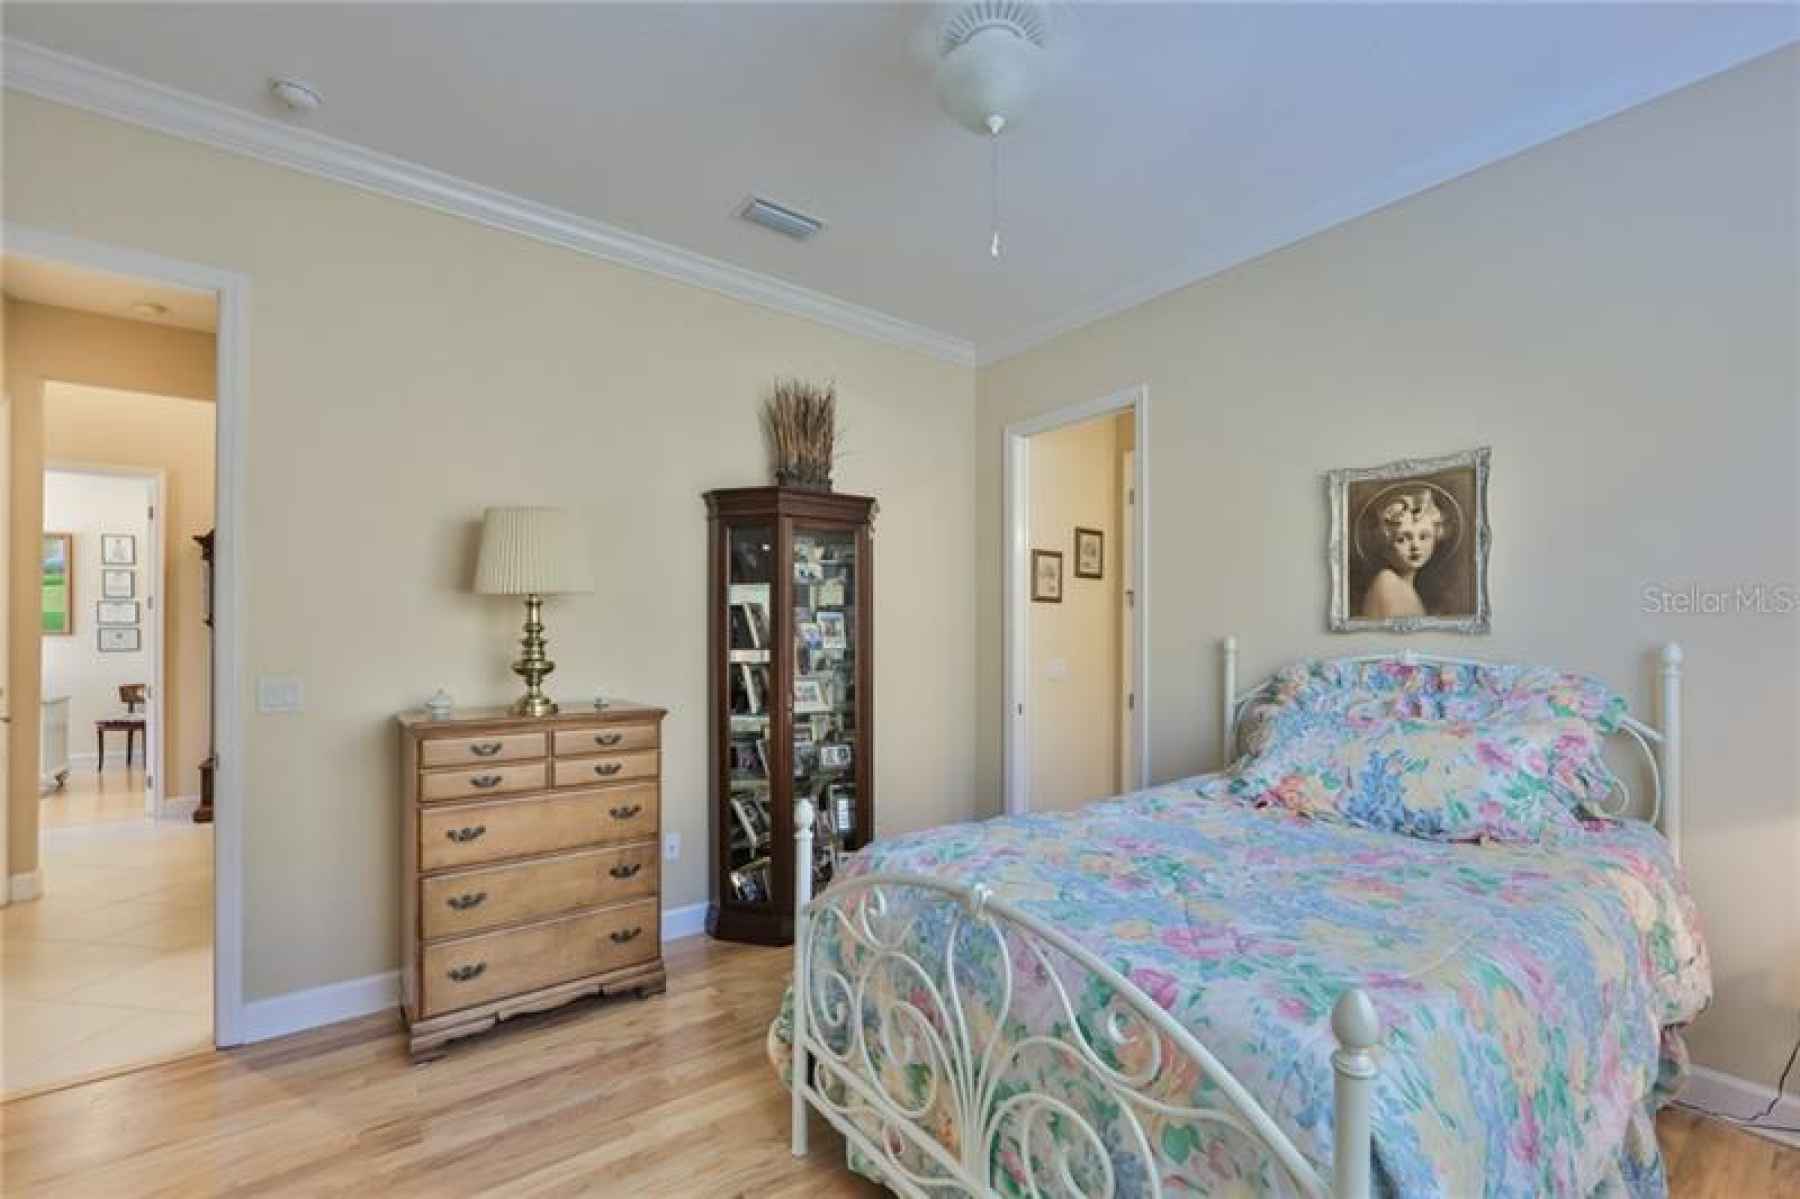 Lovely second bedroom is relaxing and spacious.